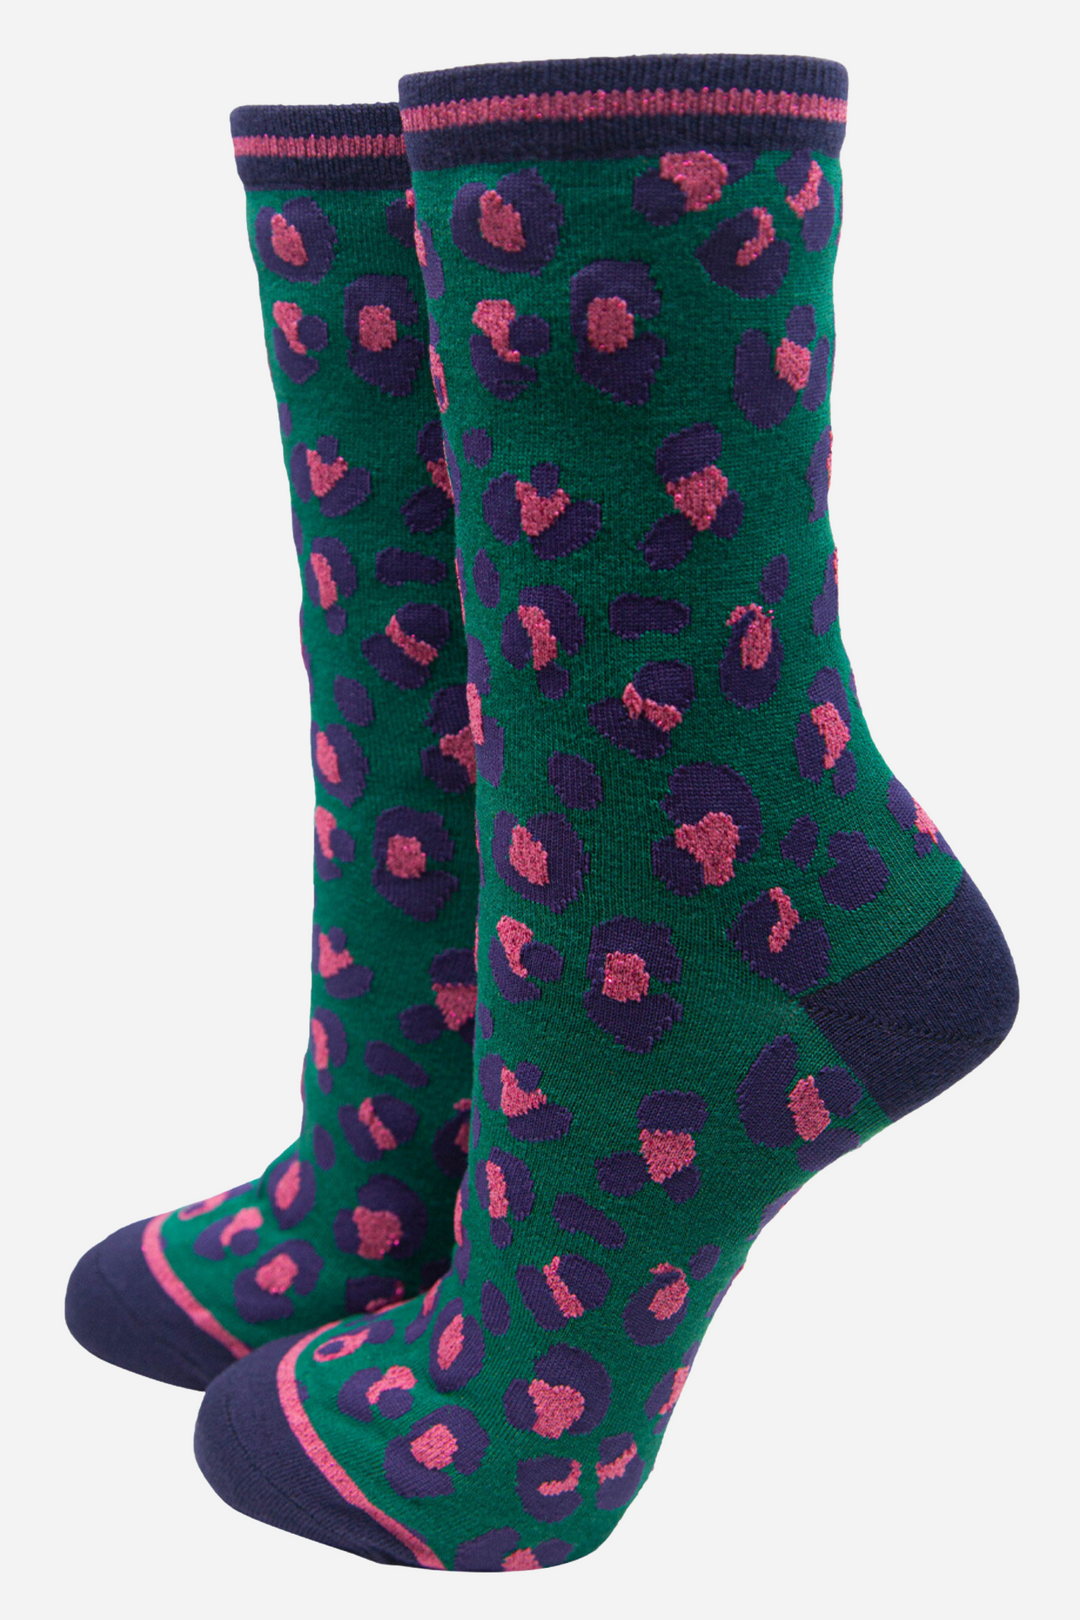 green bamboo socks with a contrasting pink animal print pattern